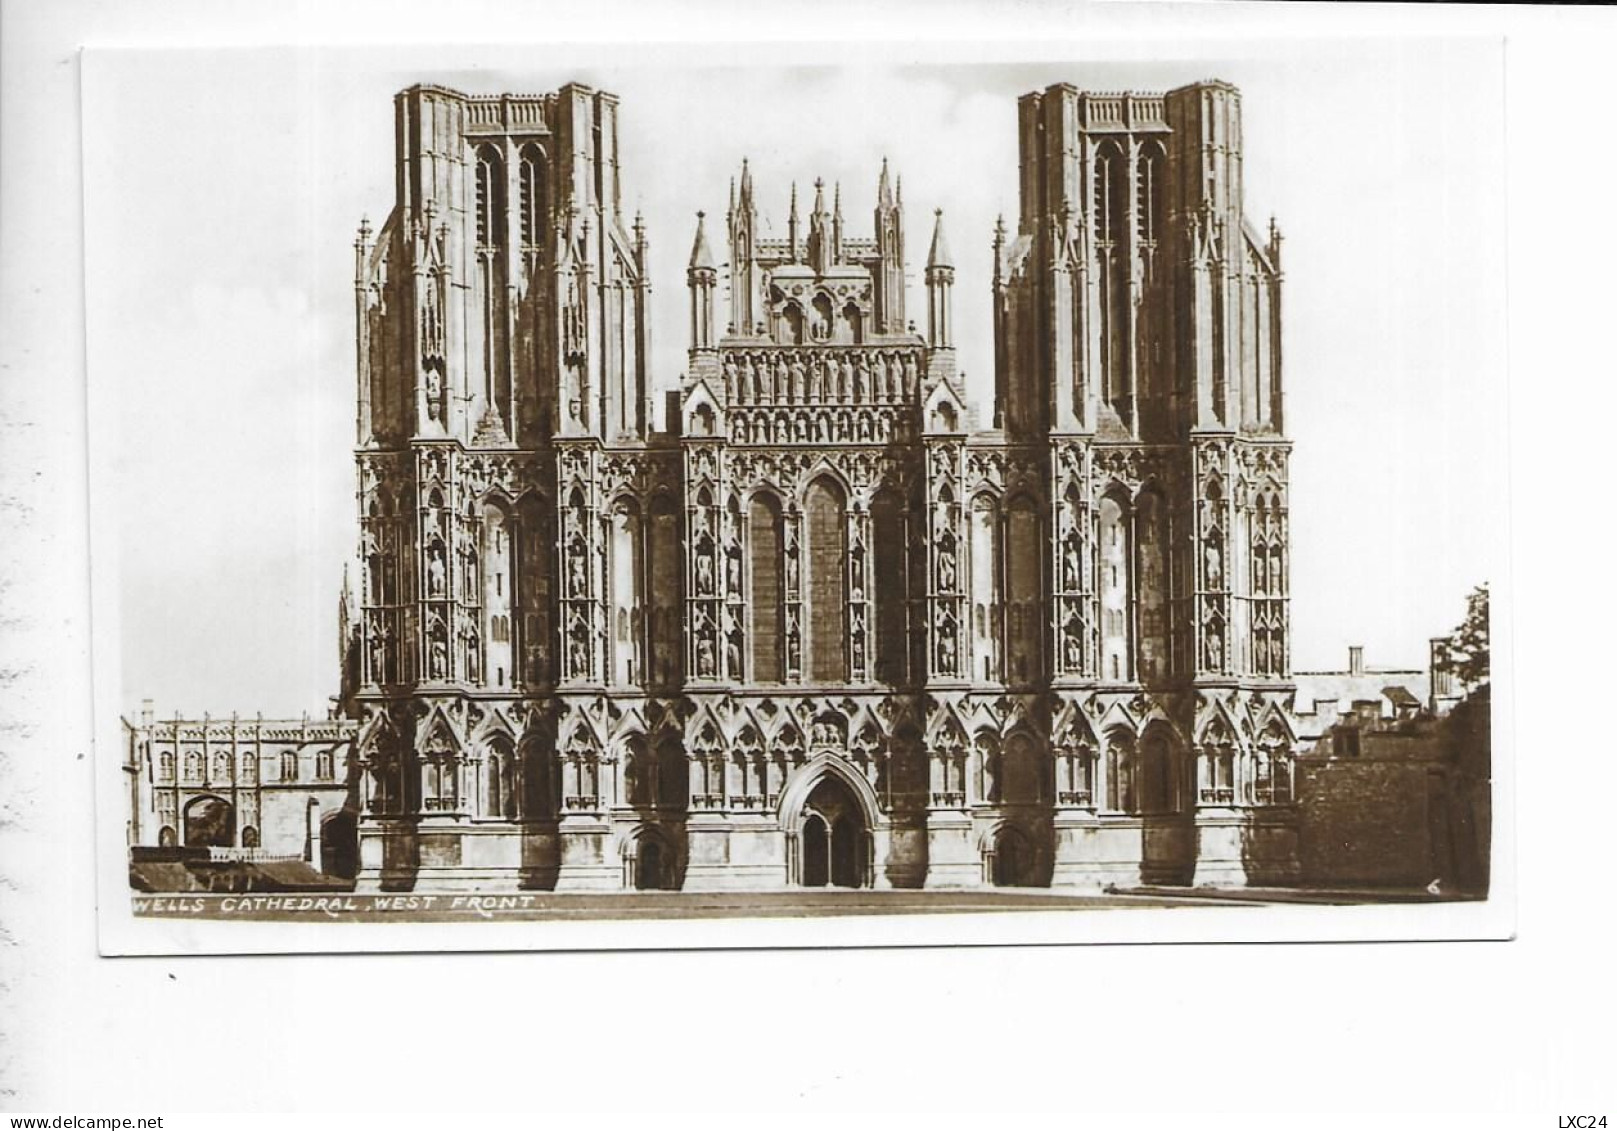 WELLS CATHEDRAL. WEST FRONT. - Wells